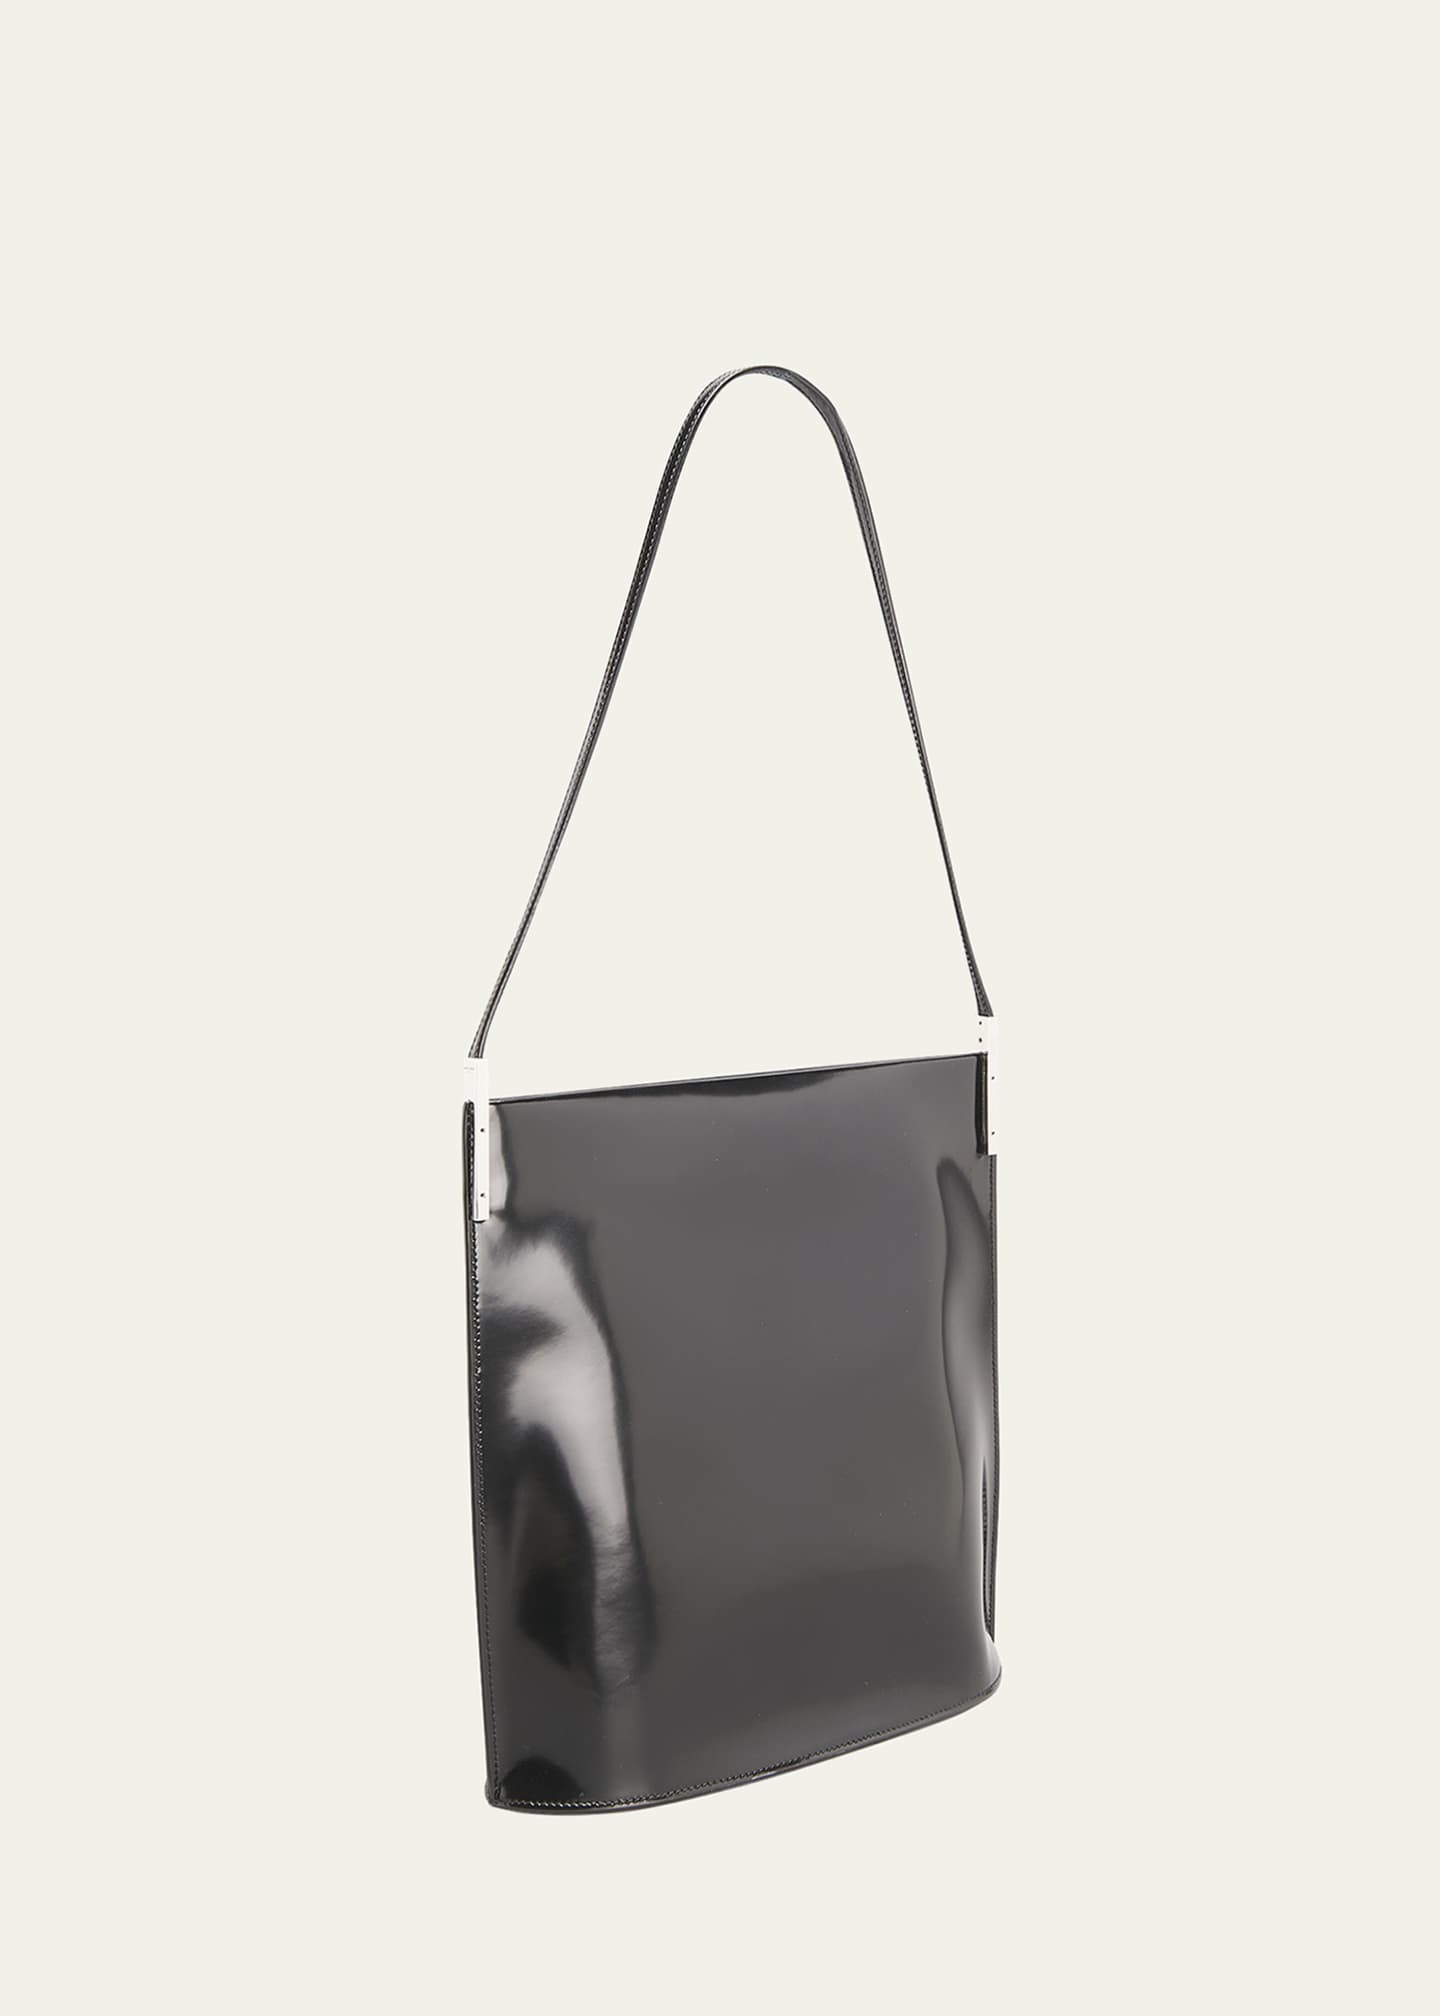 SAINT LAURENT Suzanne Leather Shopping Tote Bag, neimanmarcus